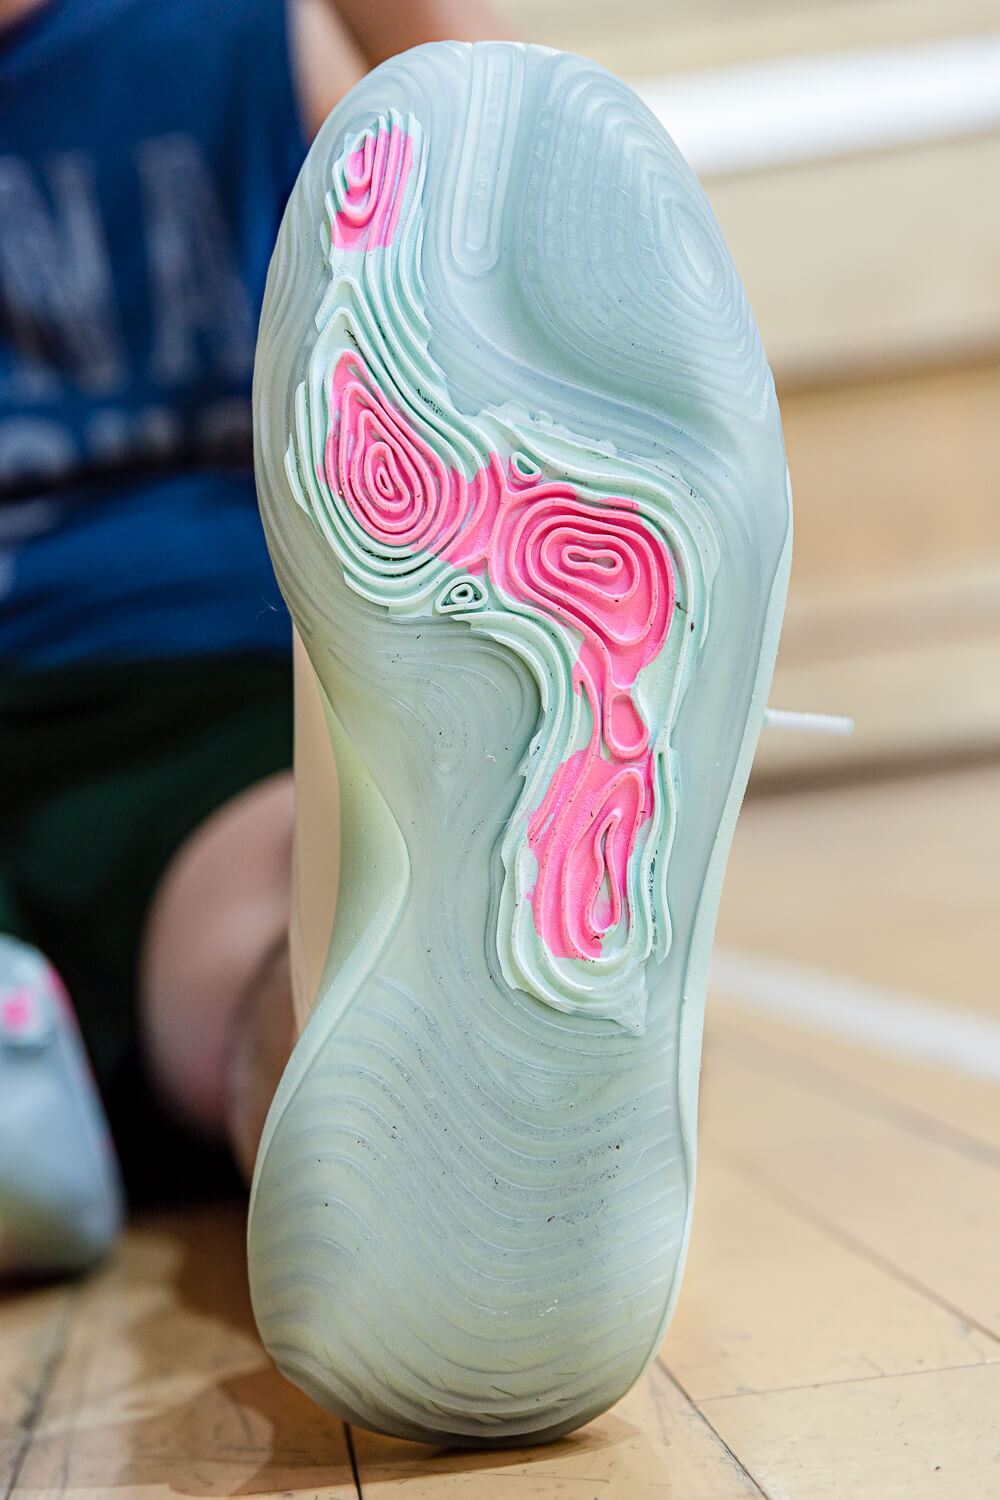 anatomix spawn review